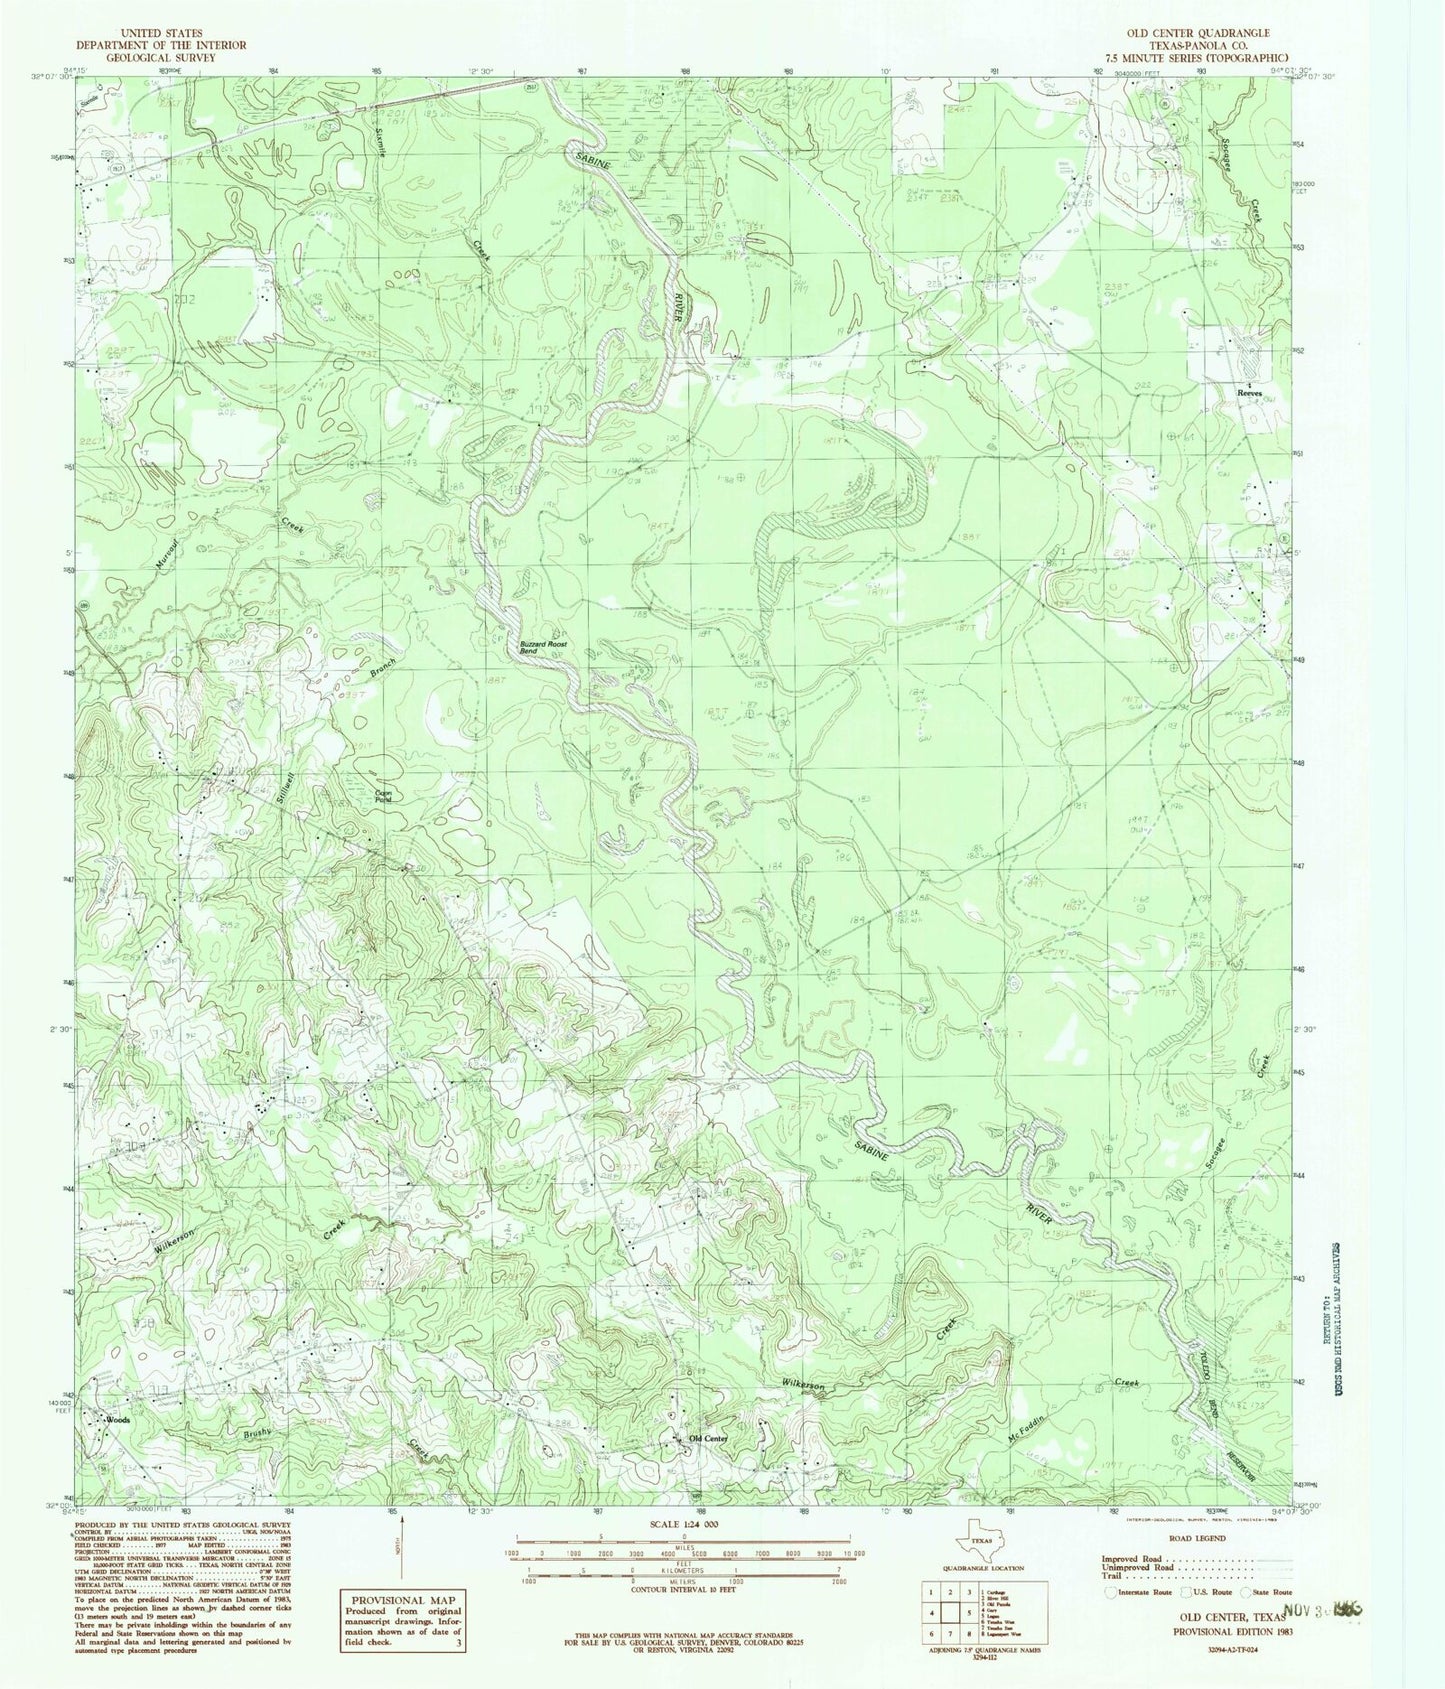 Classic USGS Old Center Texas 7.5'x7.5' Topo Map Image